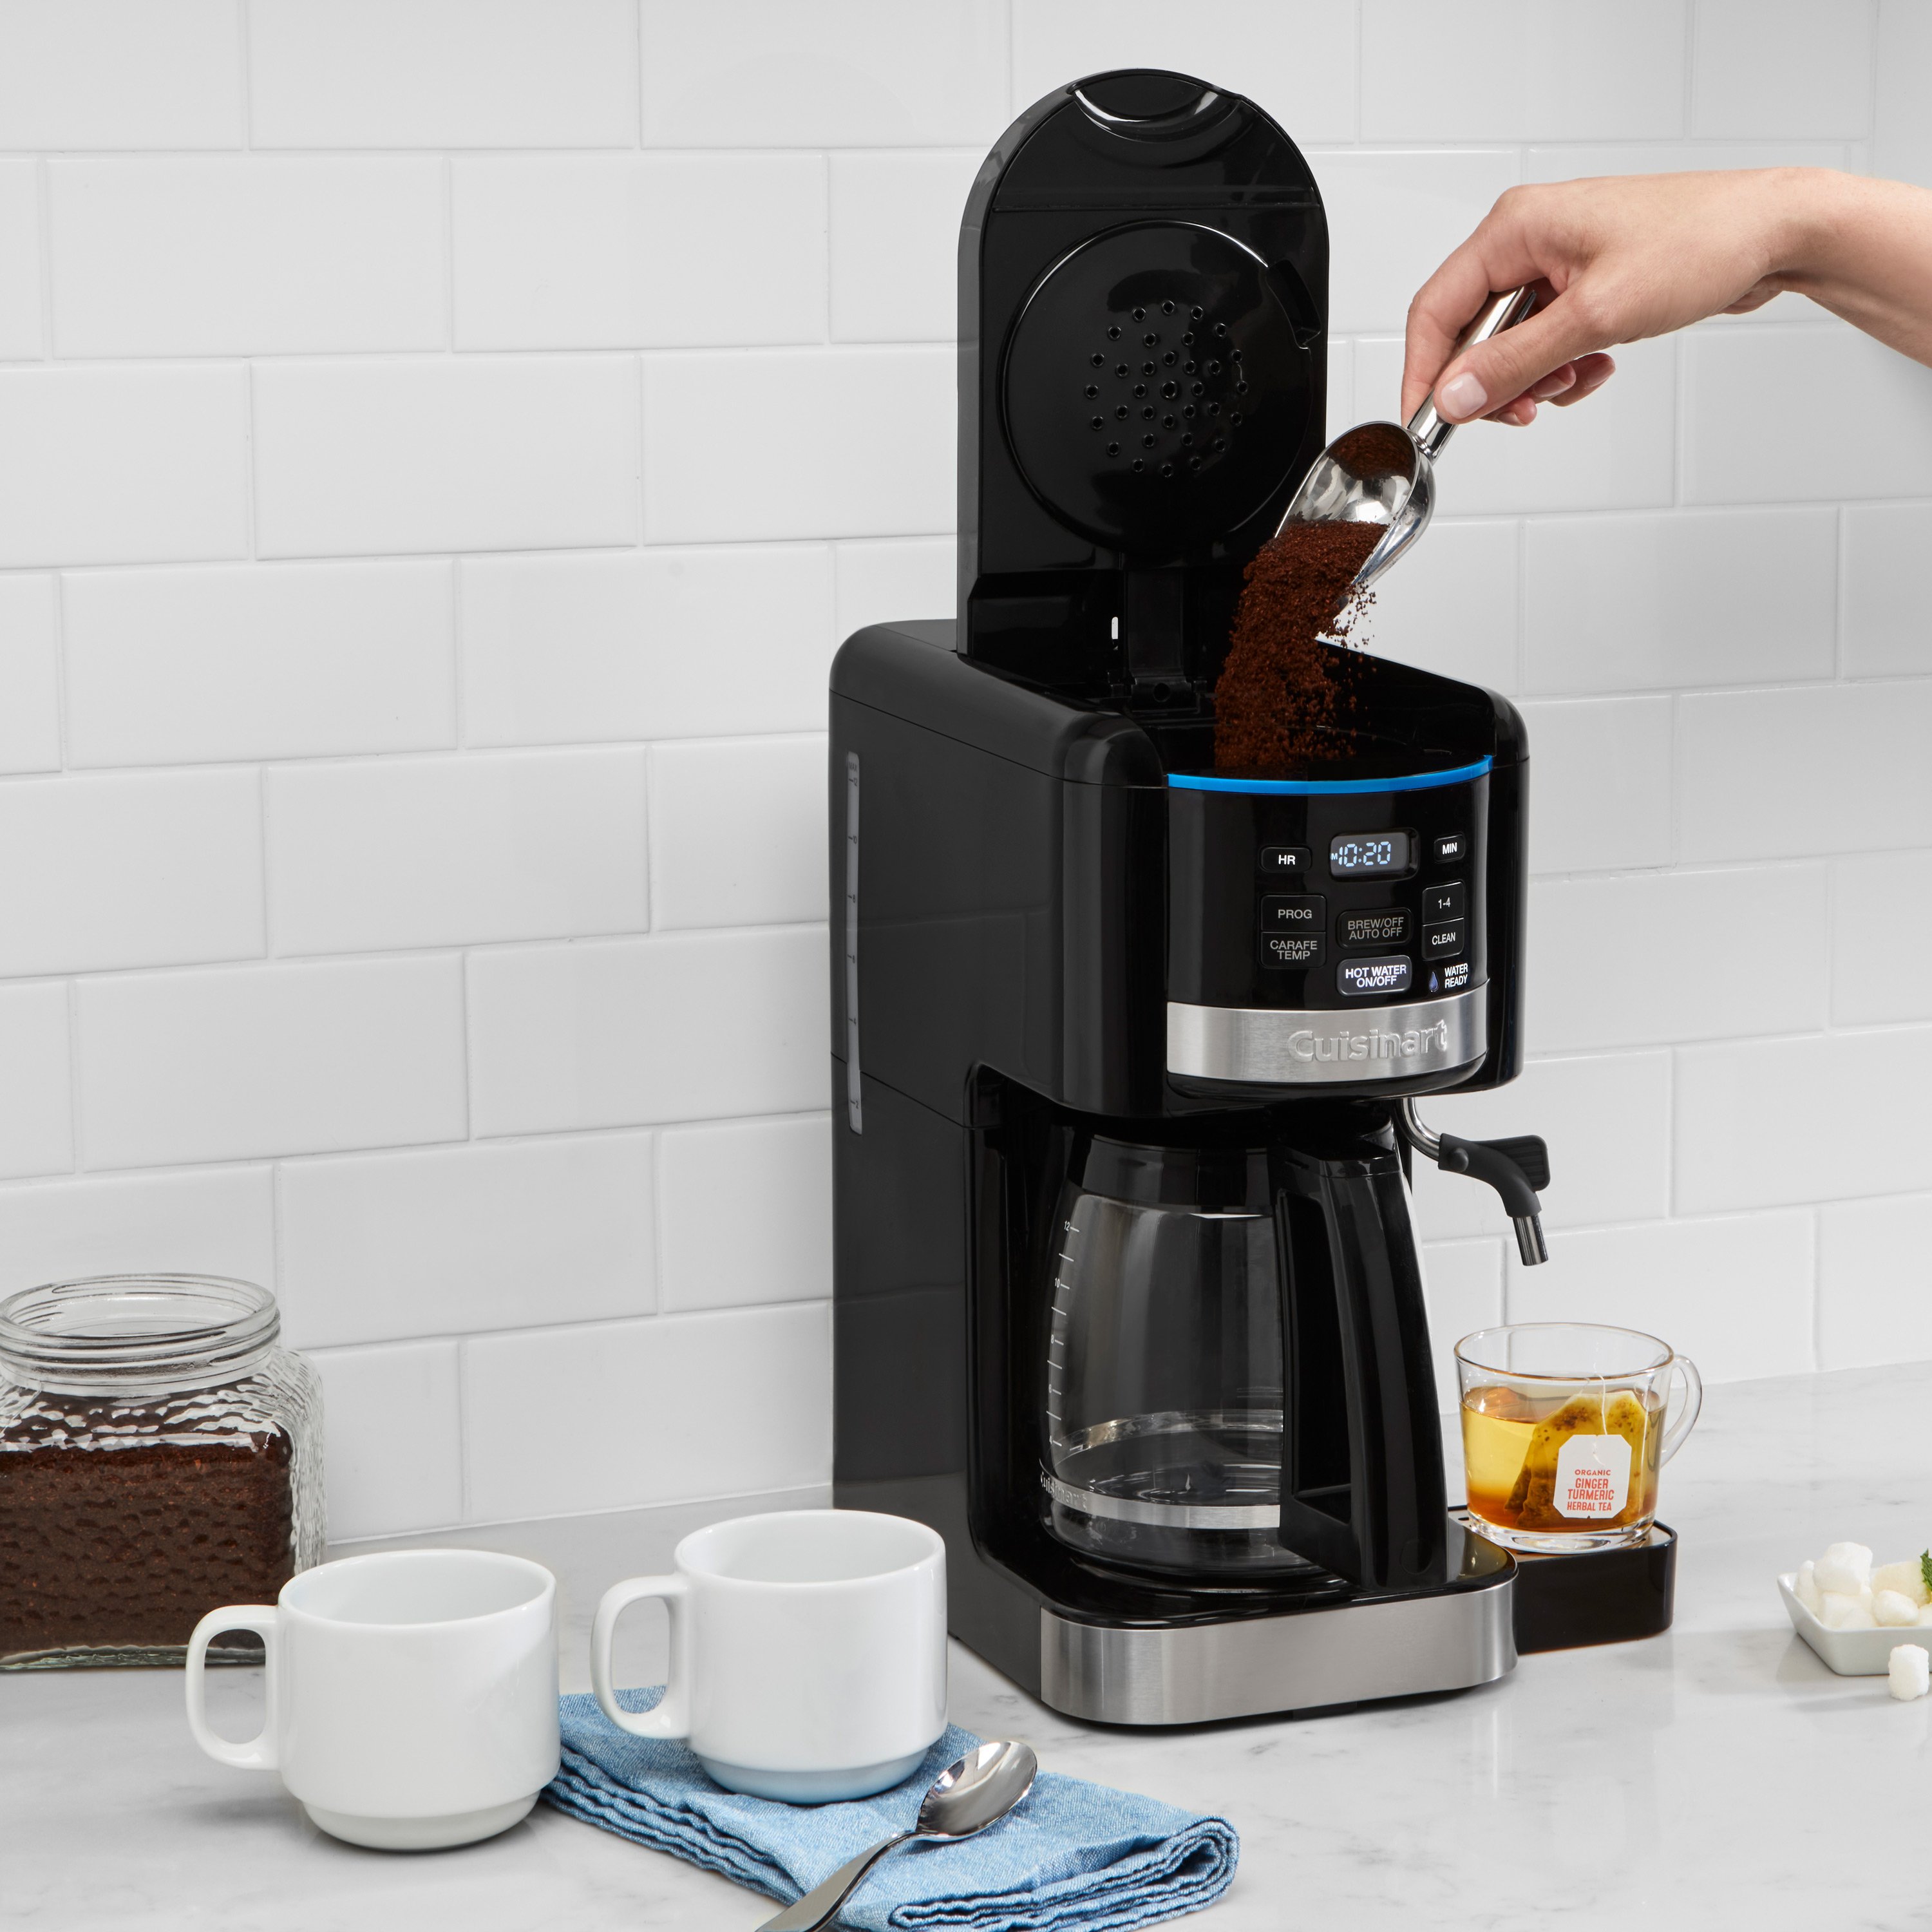 Coffee Plus 12 Cup Coffeemaker & Hot Water System